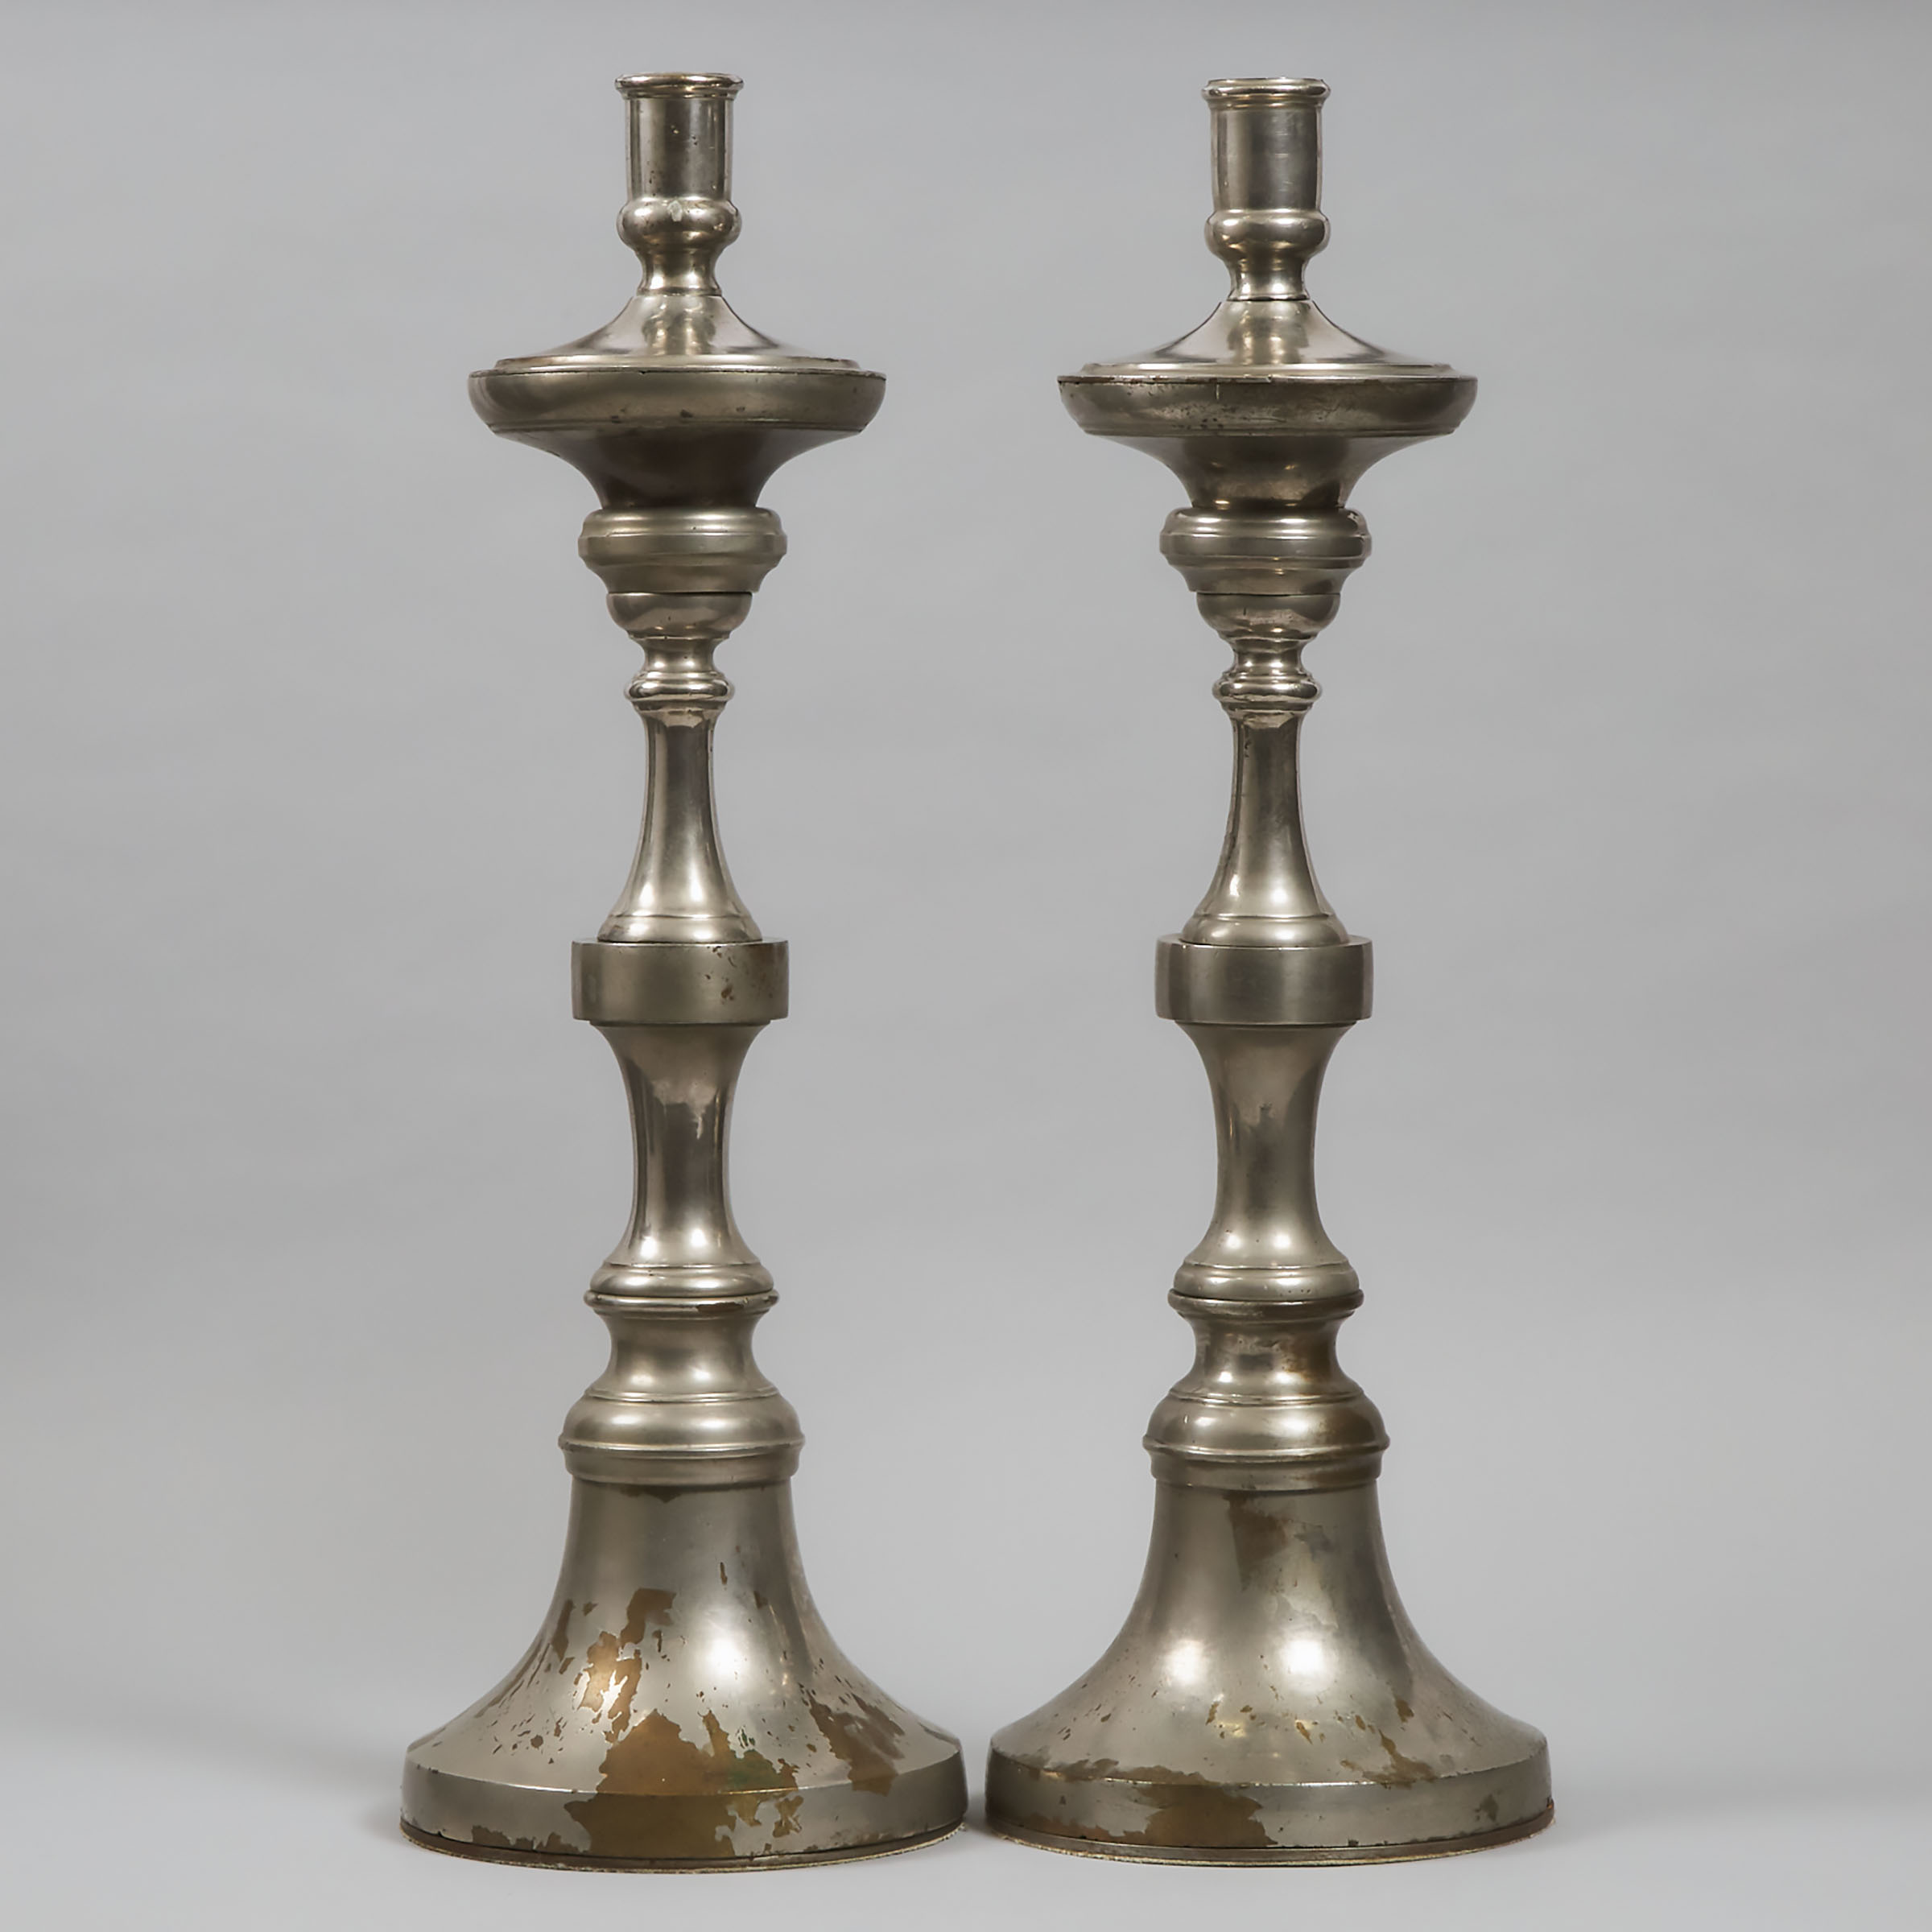 Massive Pair of Nickeled Brass Prickett Form Candlesticks, early 20th century